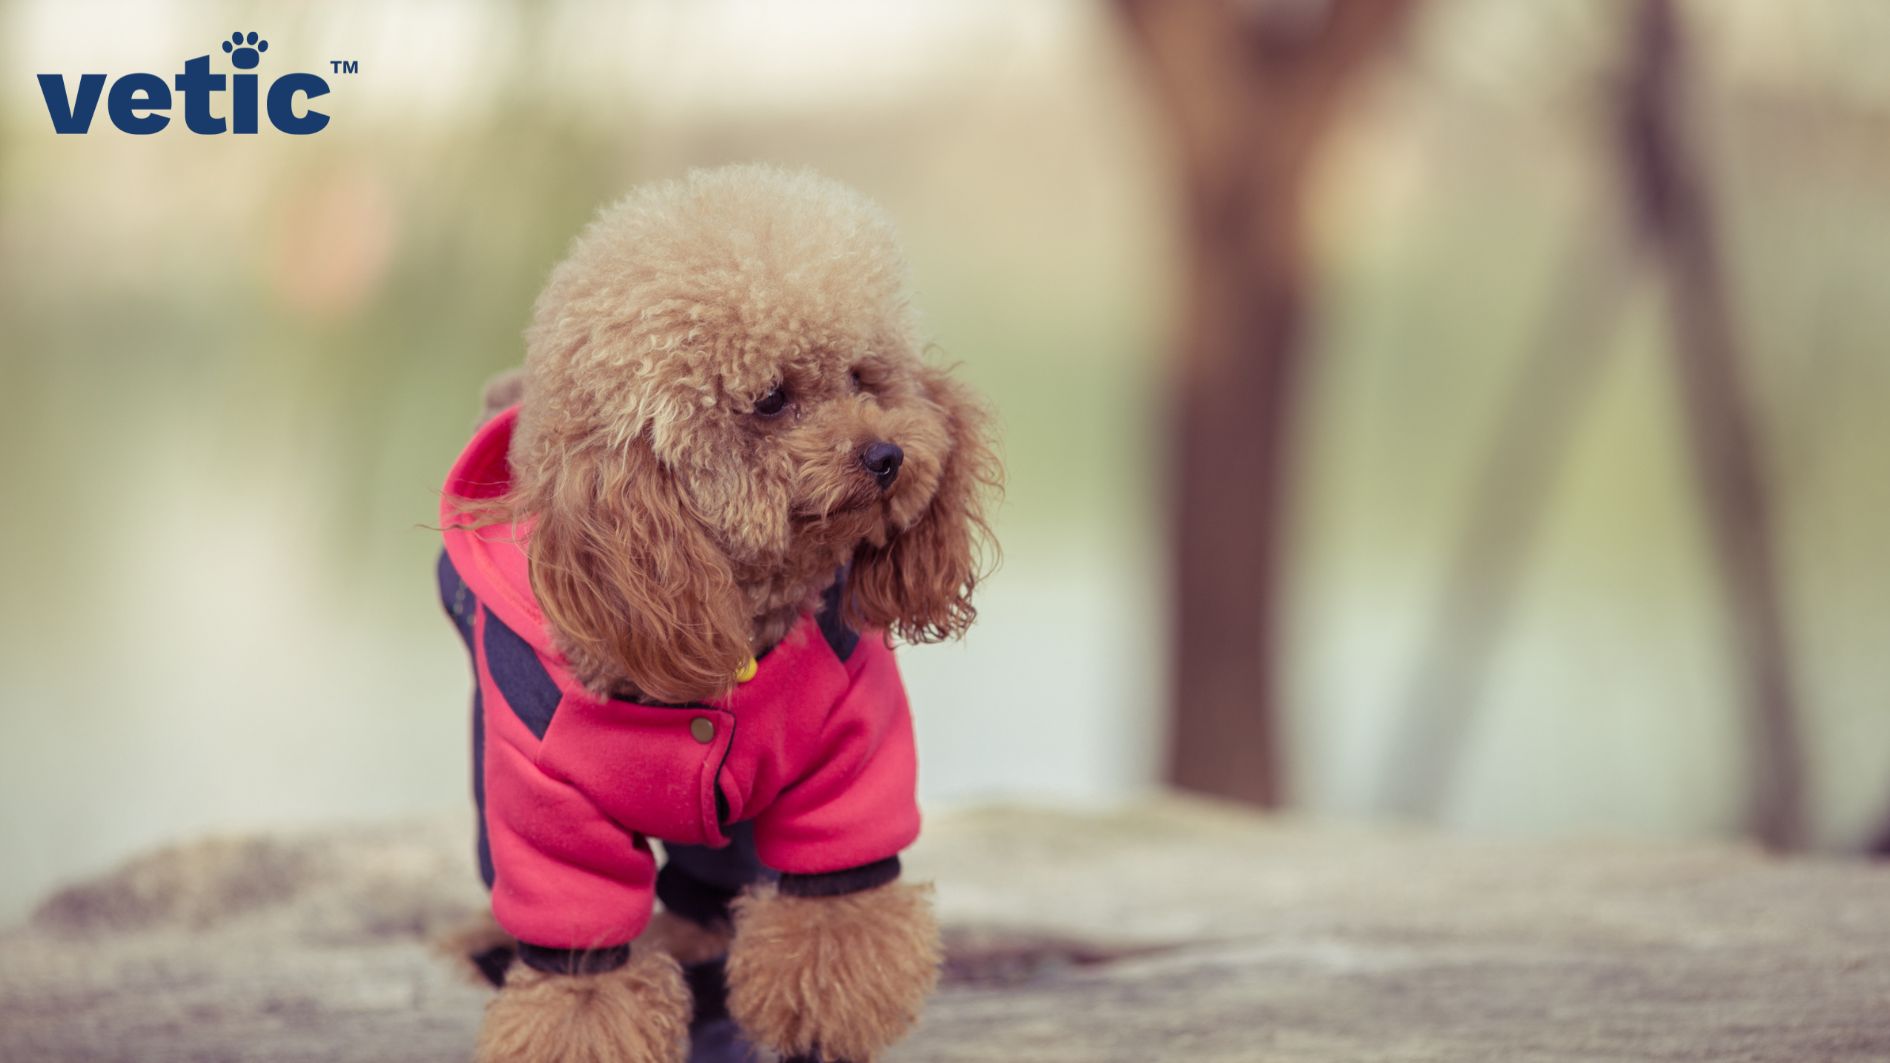 a toy poodle wearing a fuchsia and navy fleece jacket